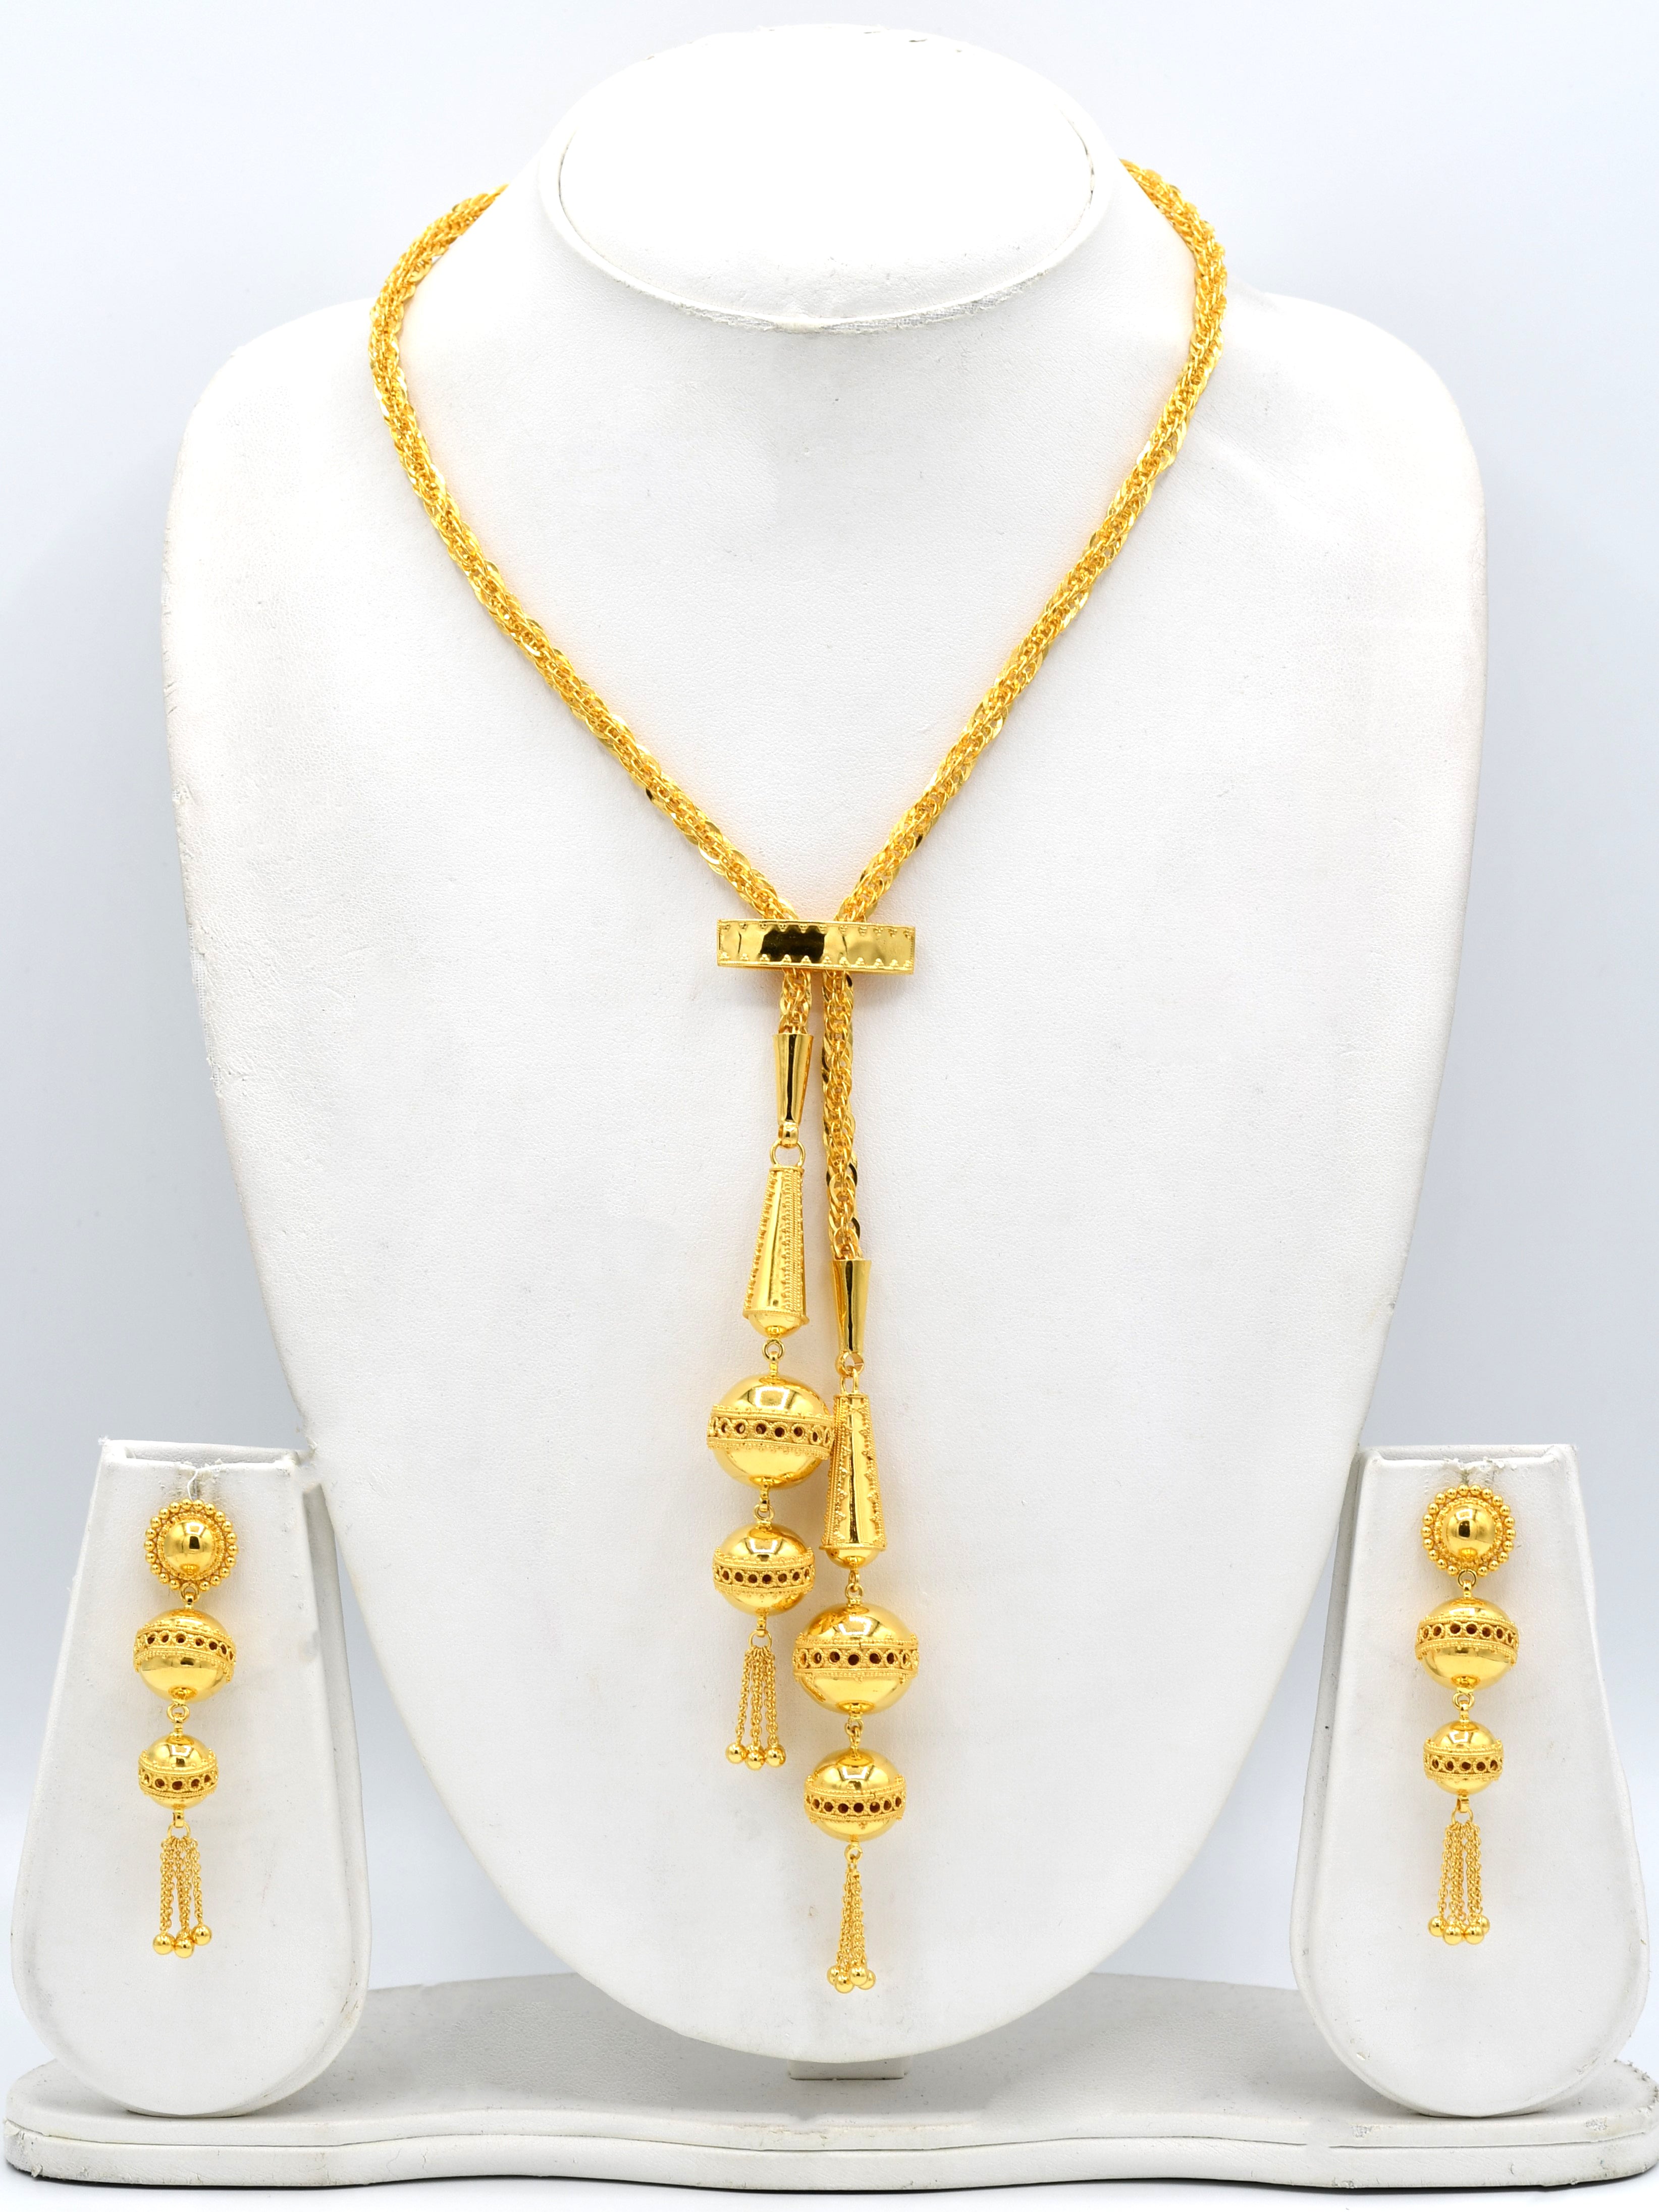 Buy Necklace Set online in Ahmedabad for best prices.